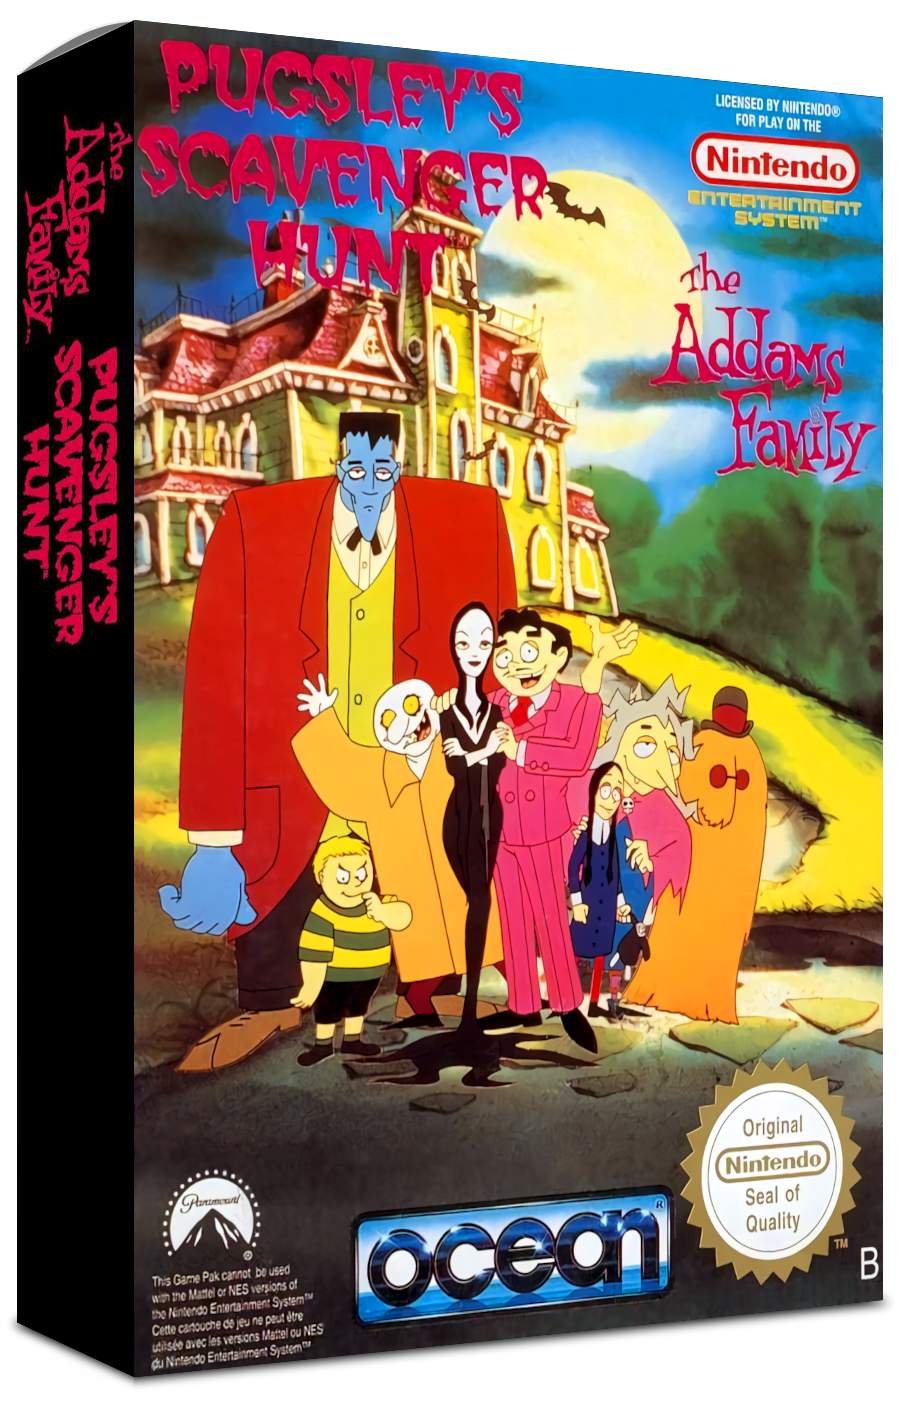 The Addams Family: Pugsley's Scavenger Hunt Images - LaunchBox Games ...